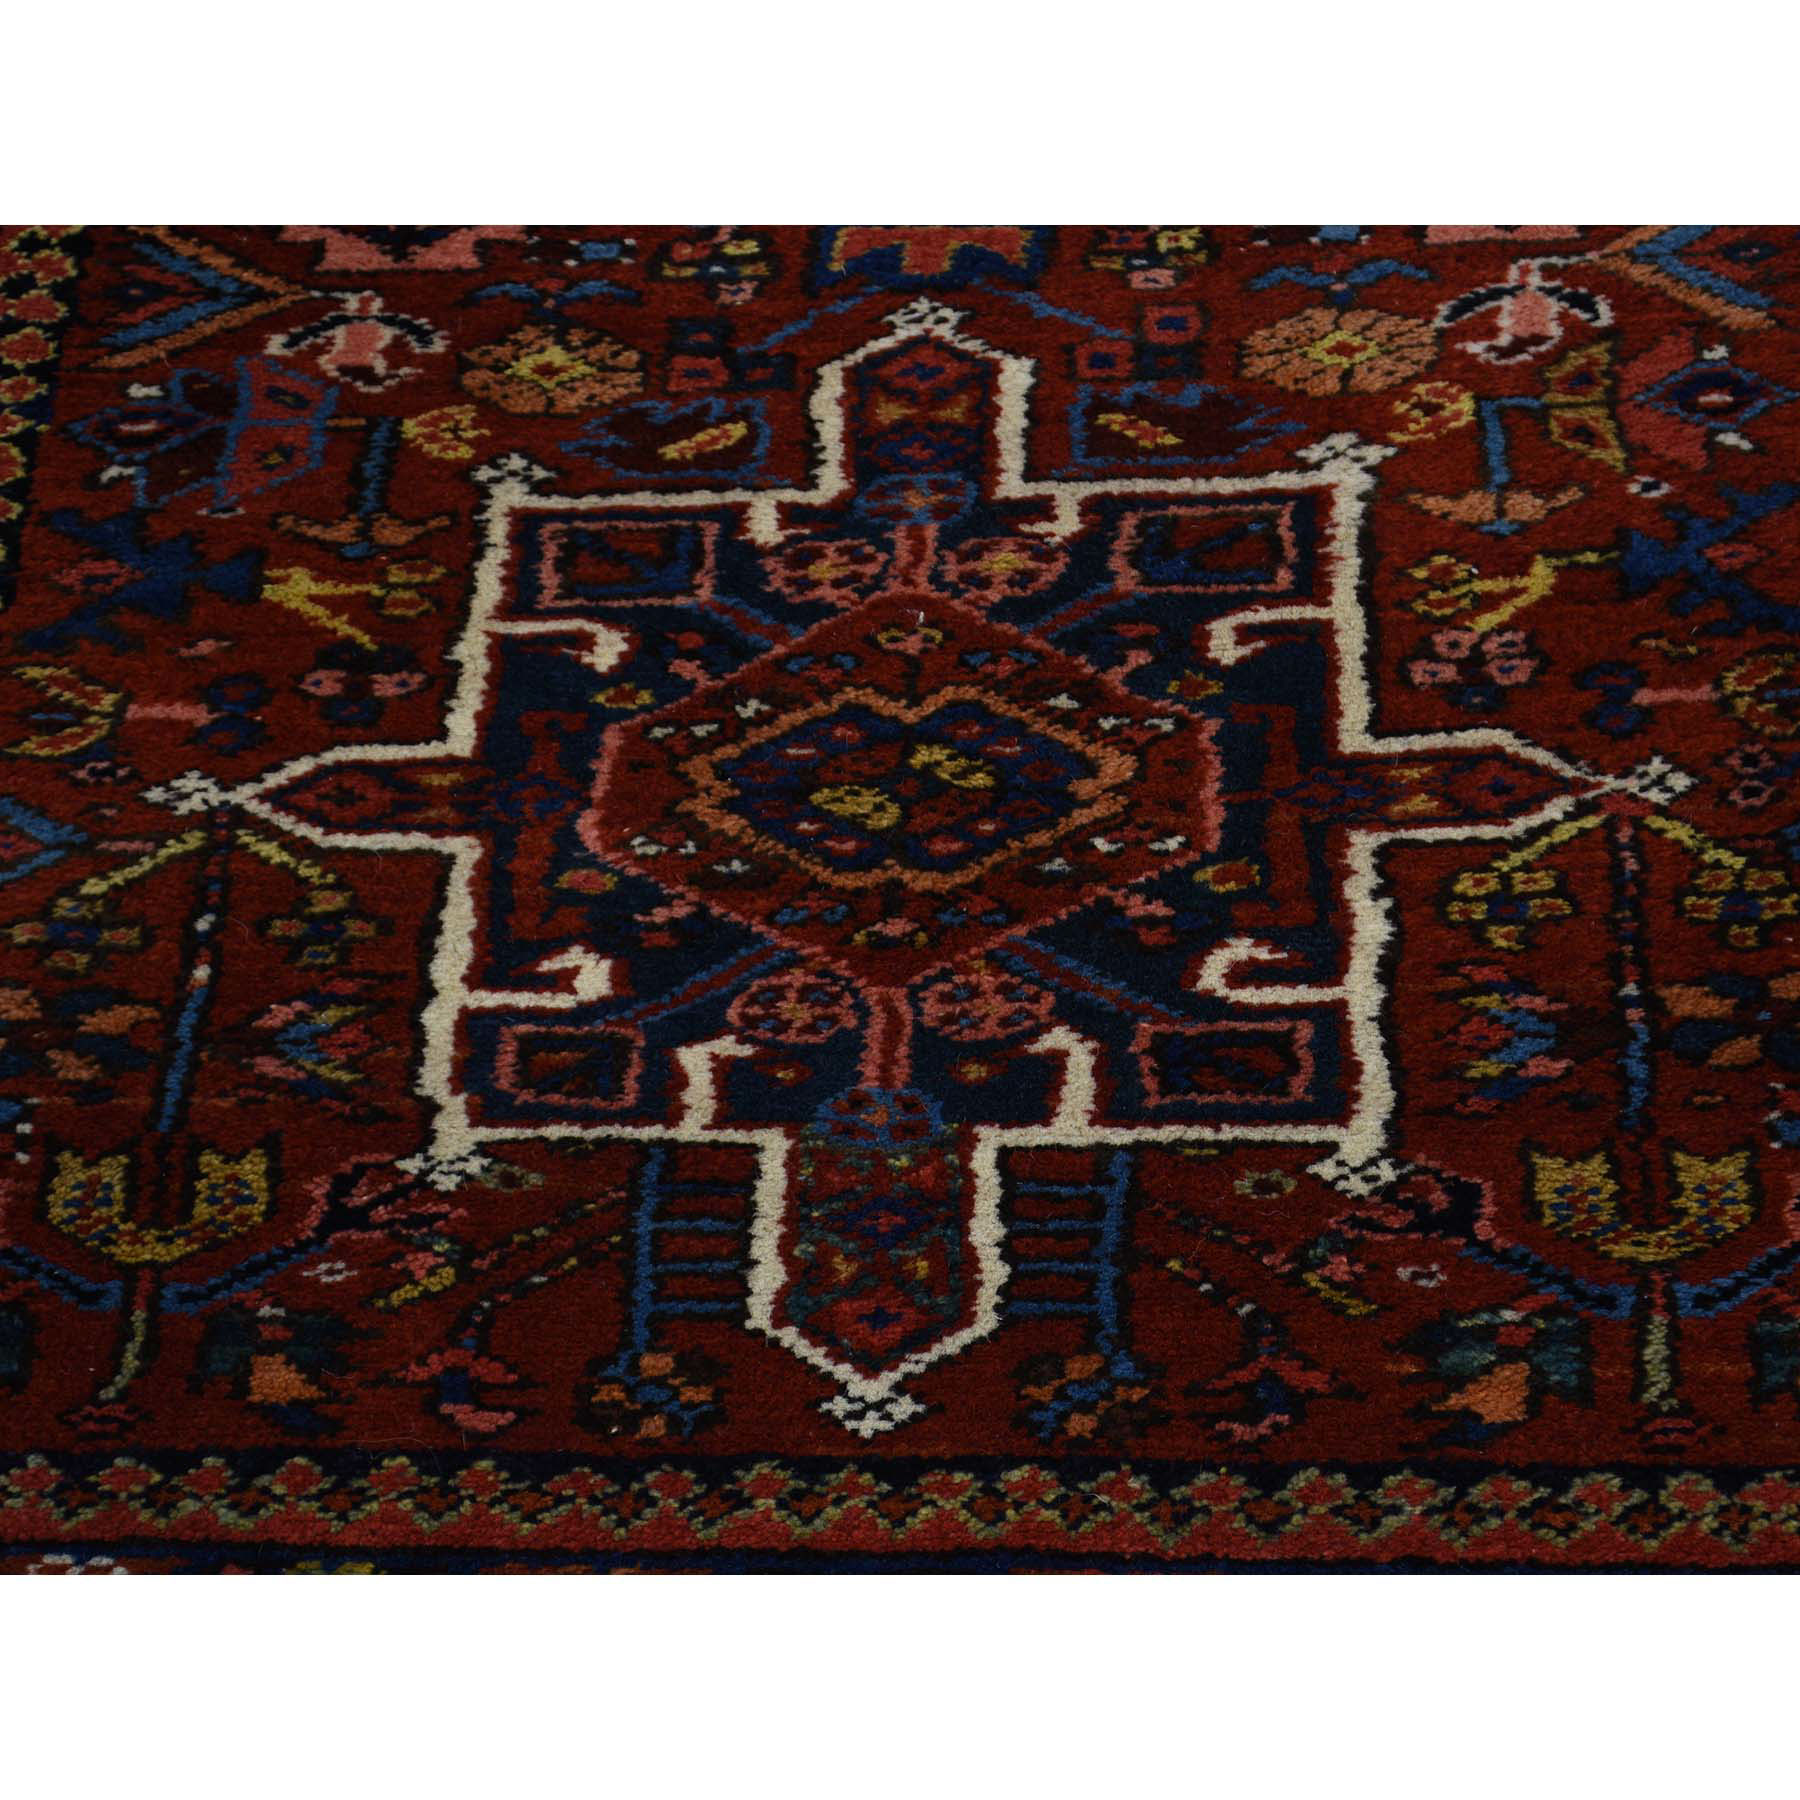 3-7 x17-4  Gallery Size Antique Persian Karajeh Excellent Condition Rug 